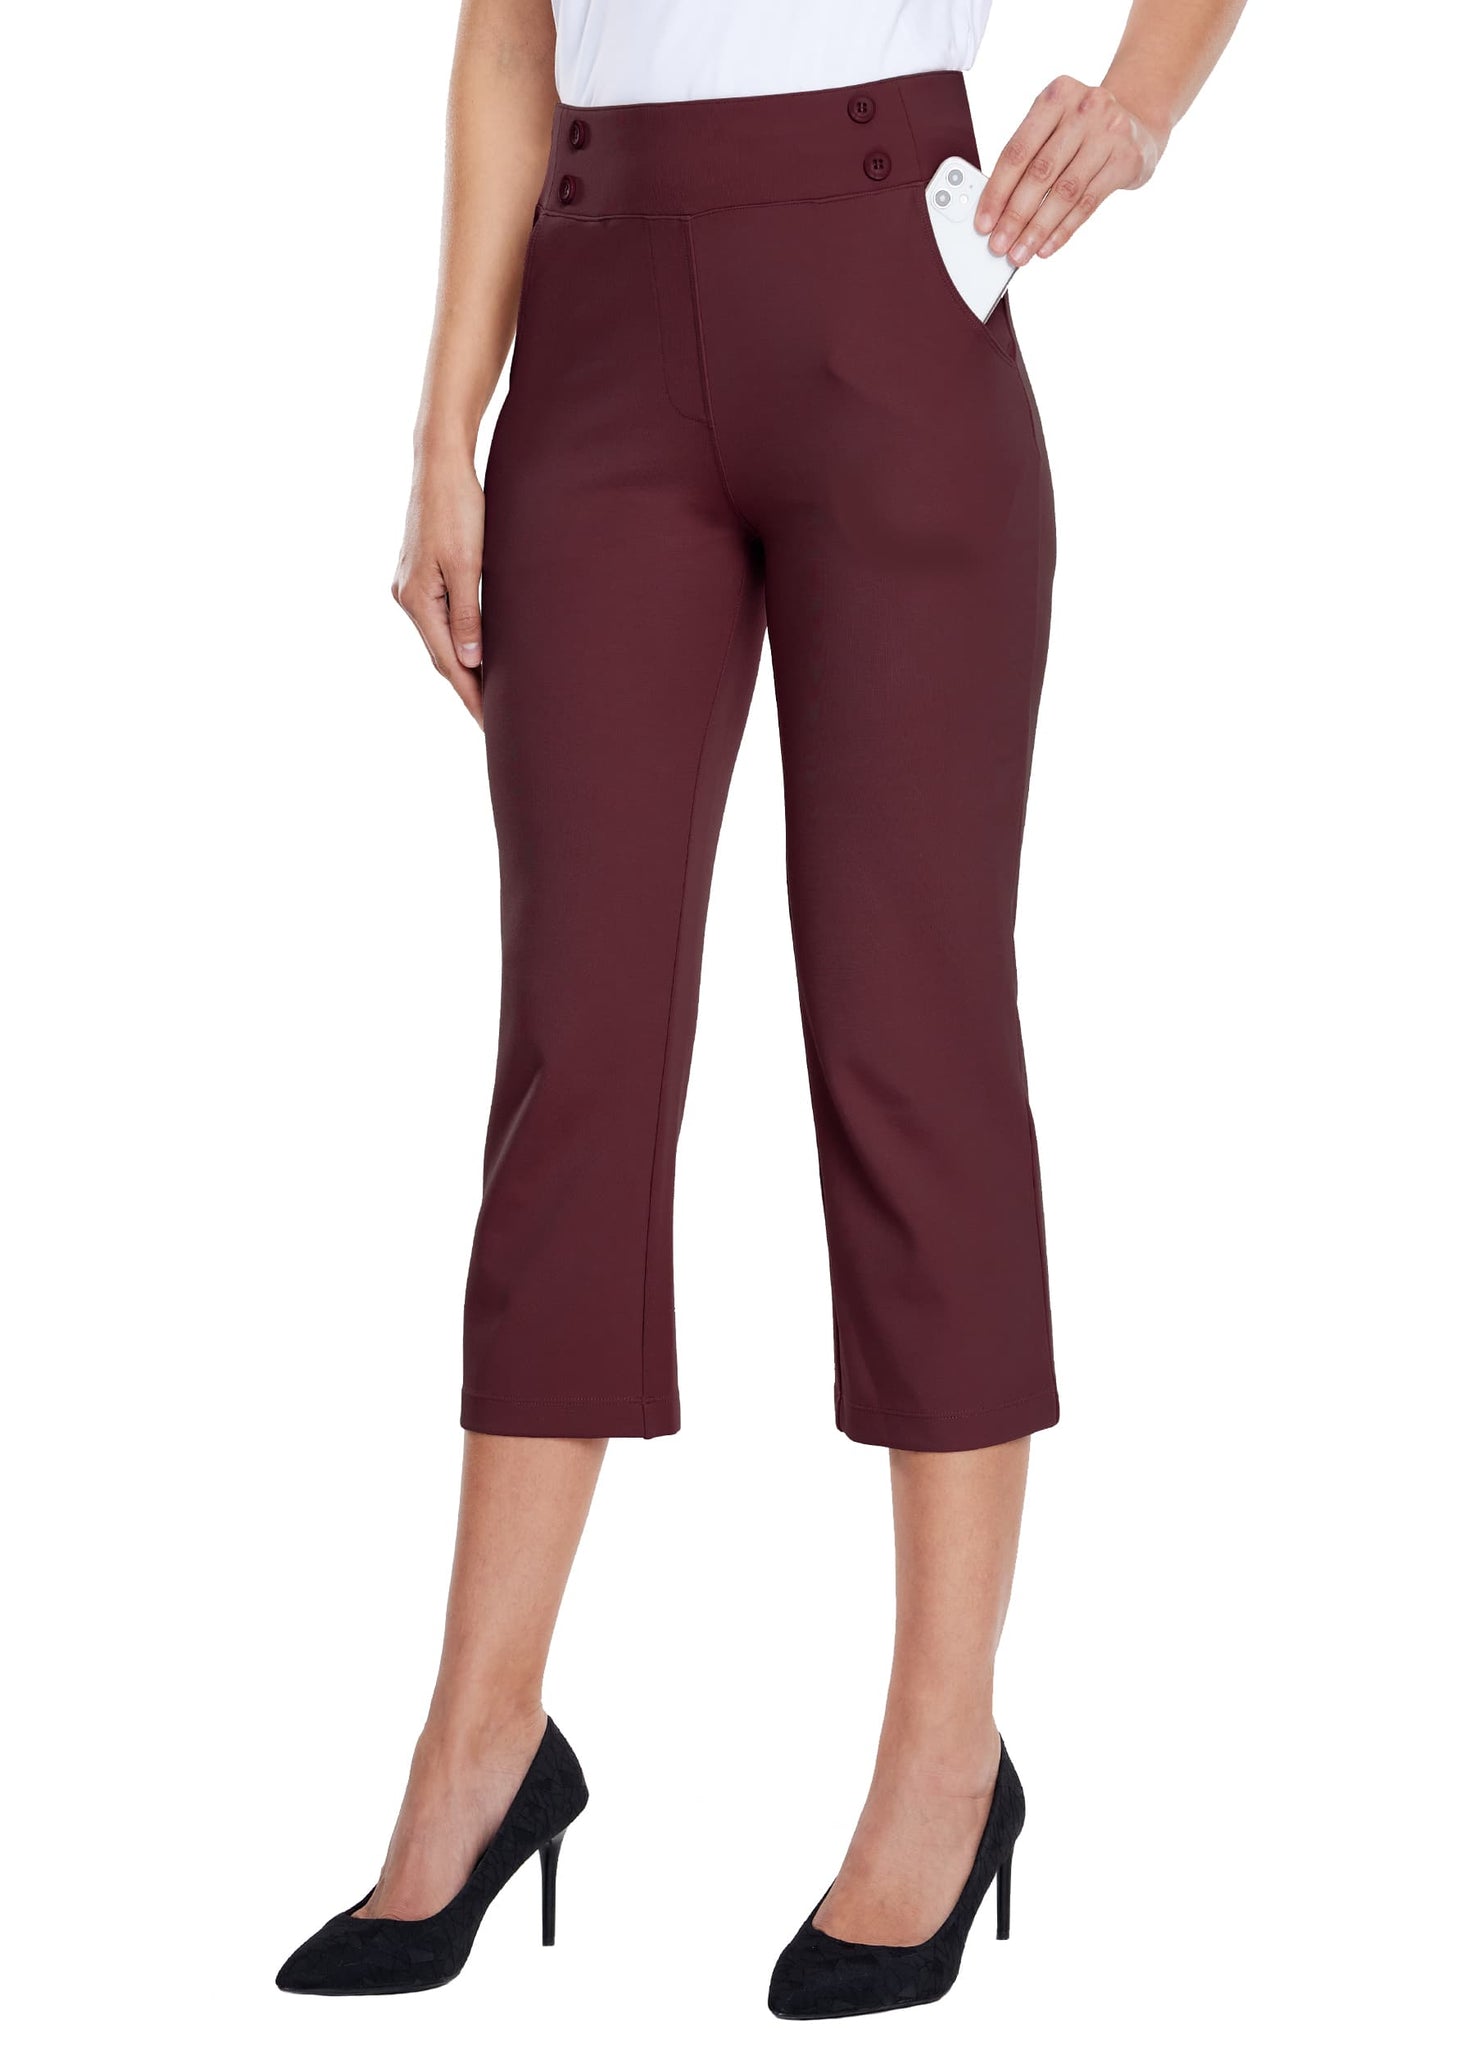 Women's Button Pull On Capris